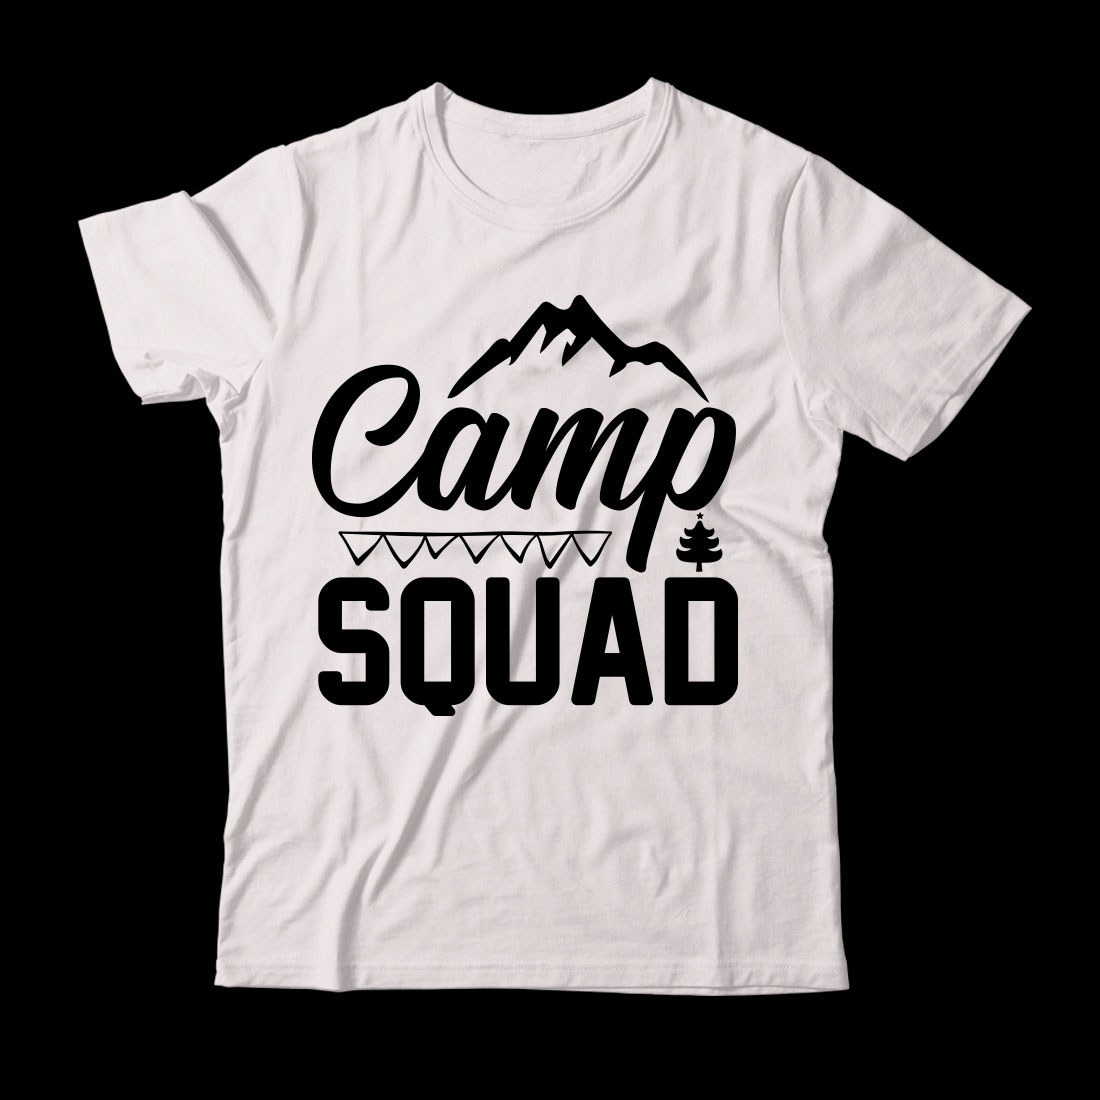 White t - shirt that says camp squad.